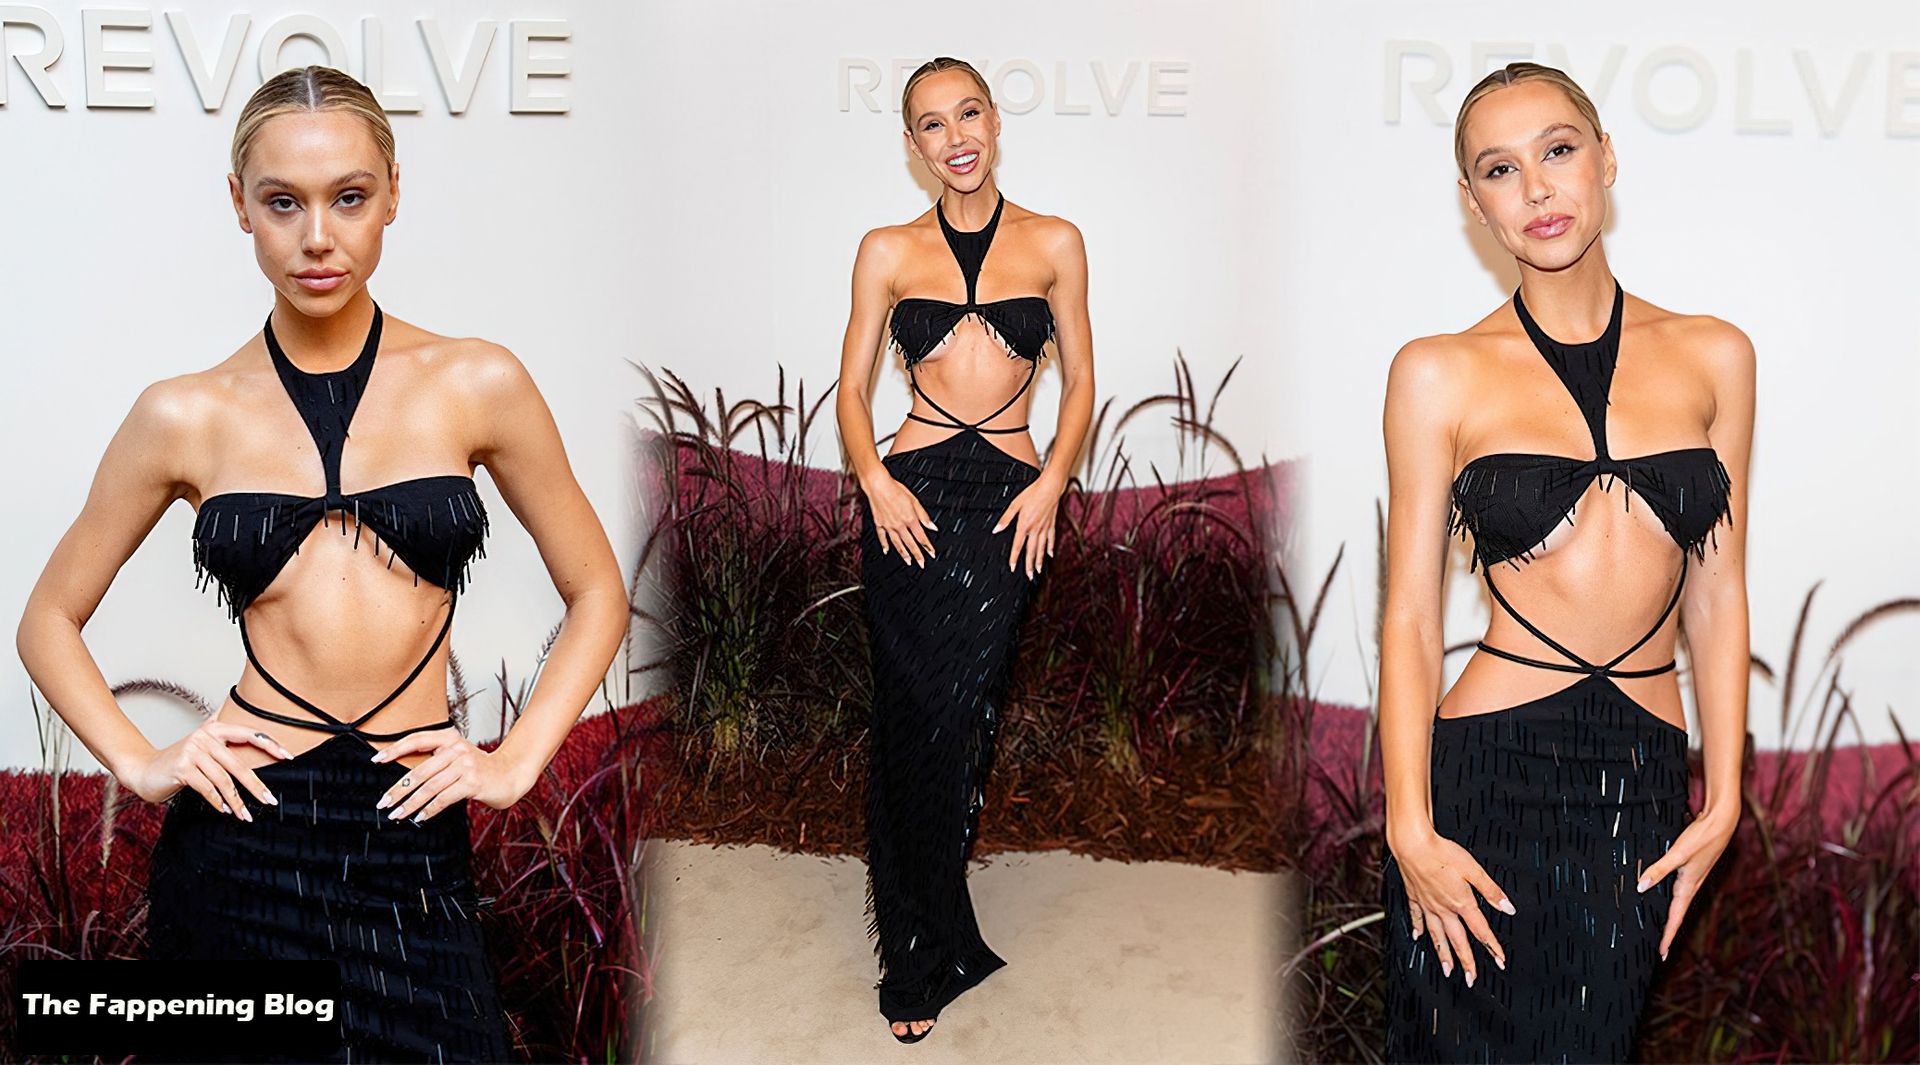 Alexis Ren Sexy The Fappening Blog 8 - Alexis Ren Displays Her Sexy Tits & Waist at the Revolve Event in Manhattan (8 Photos)